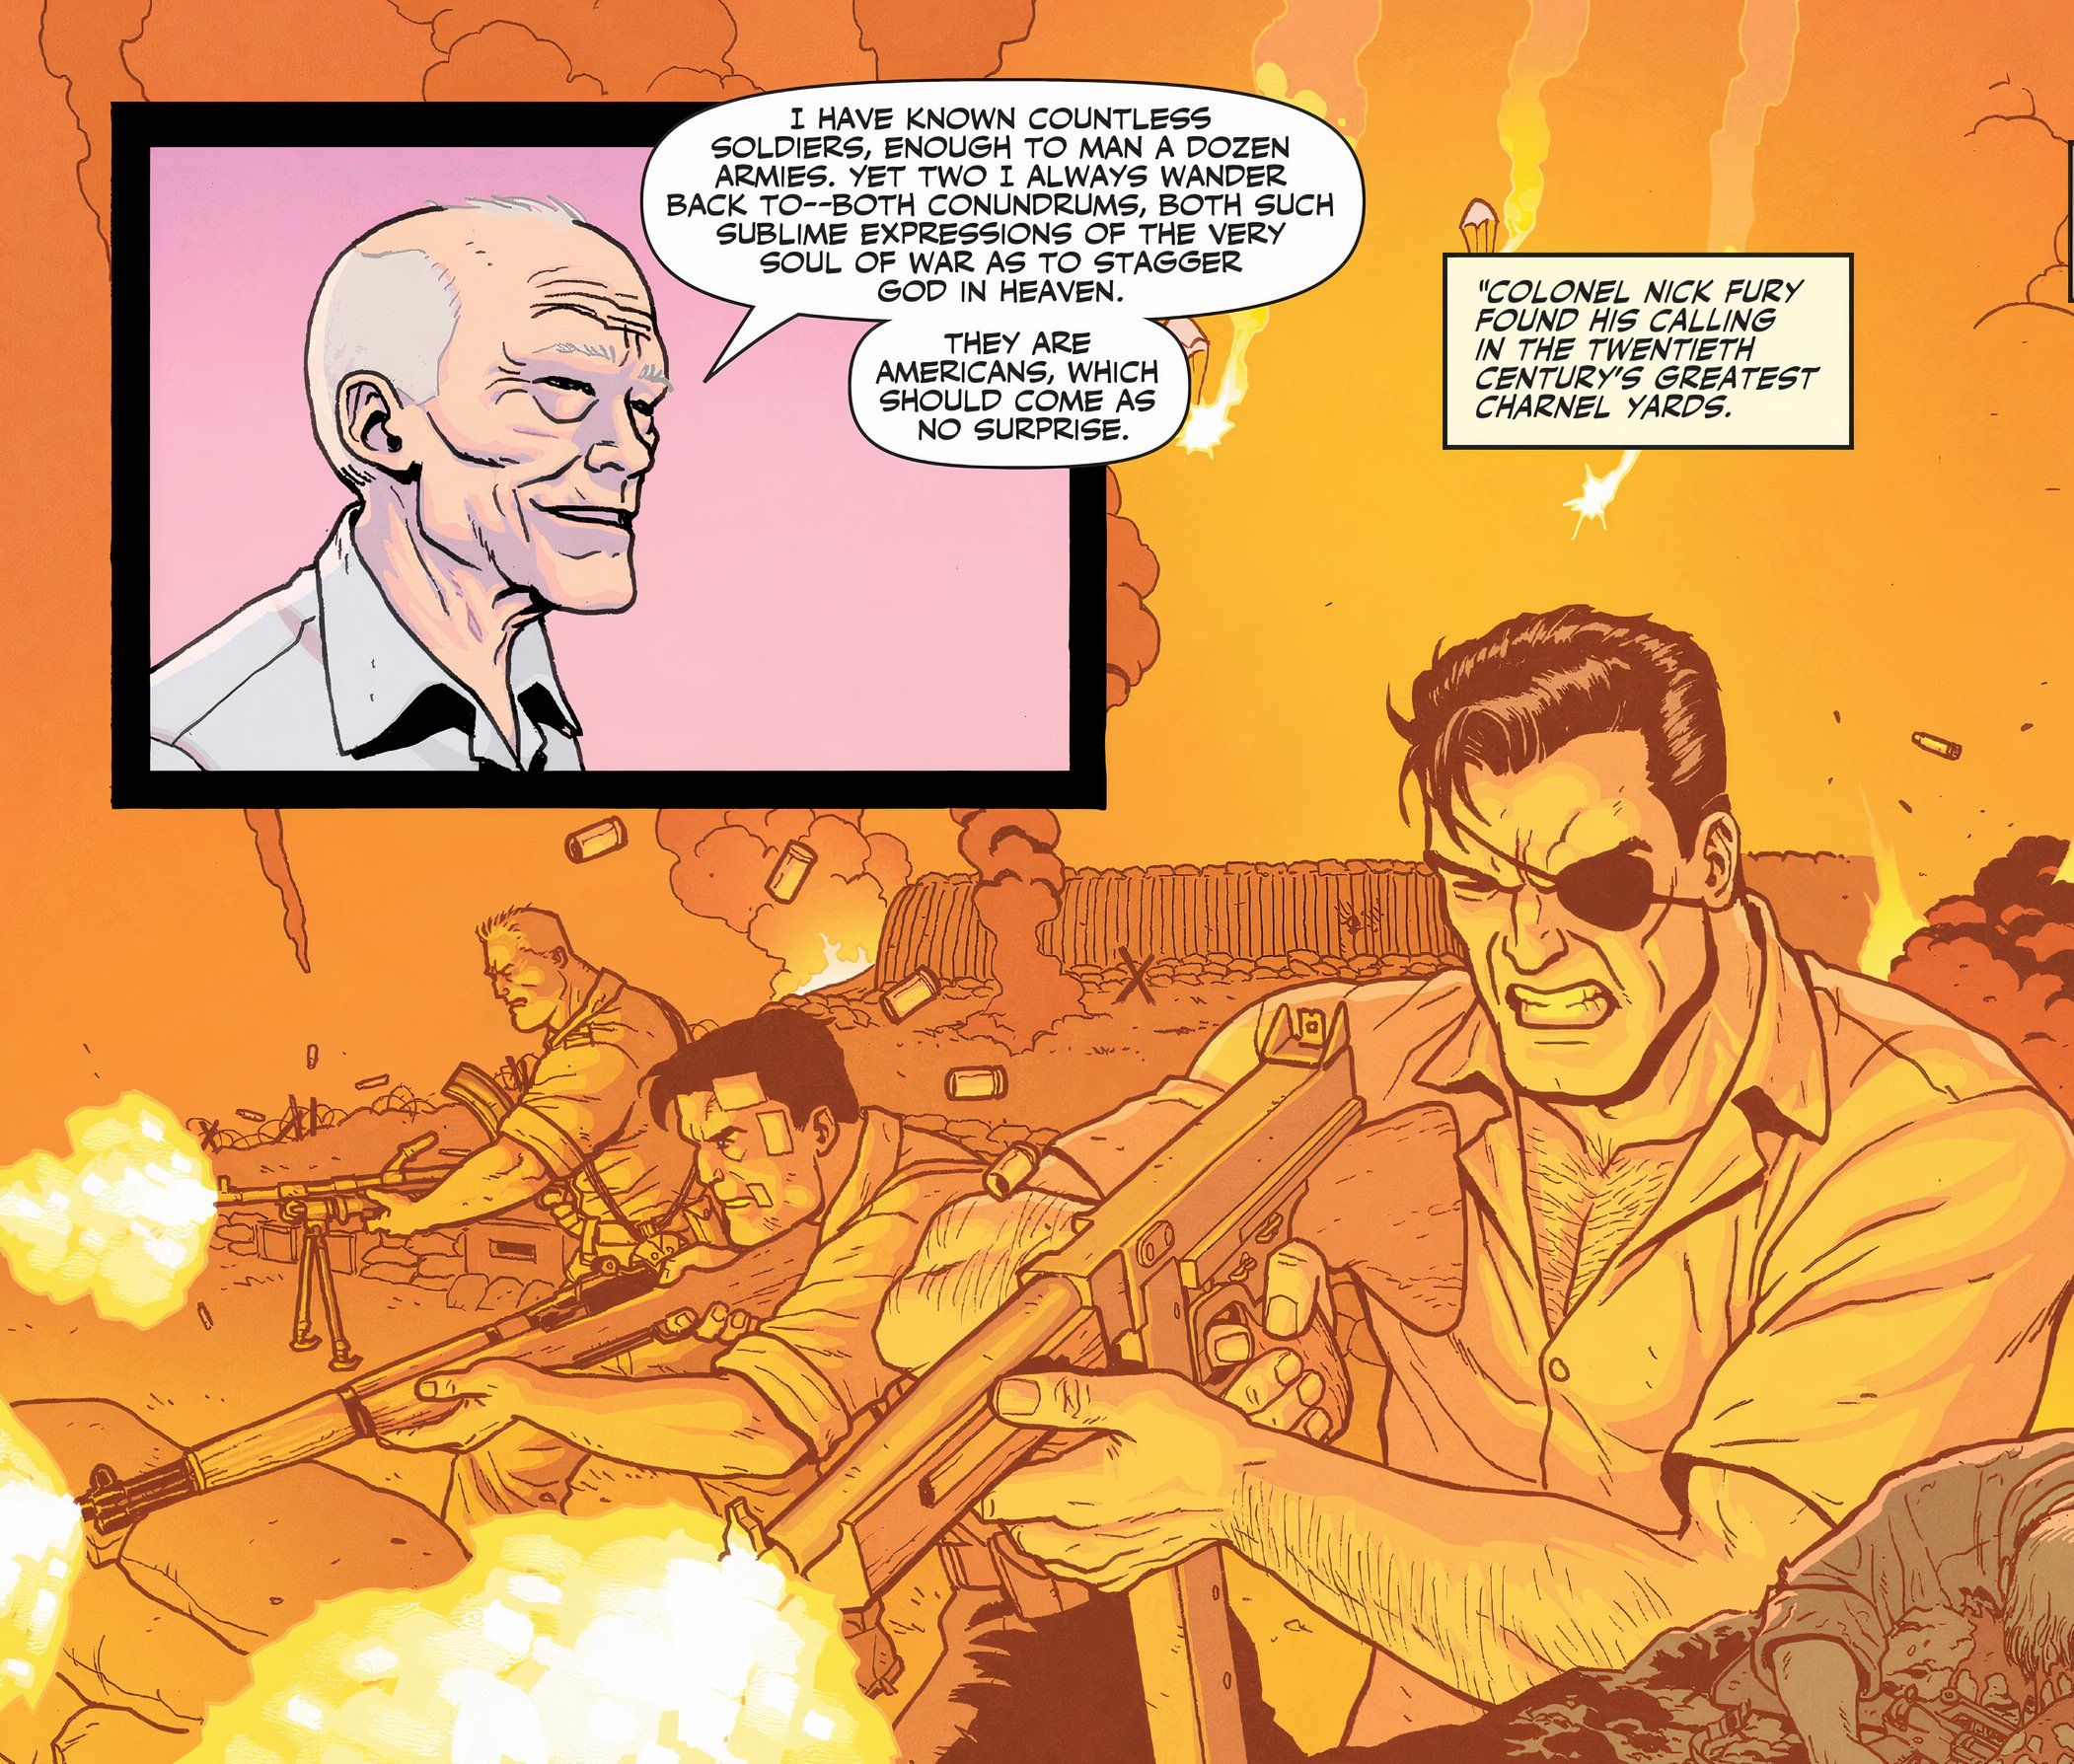 Get Fury #1 Letrong Giap tells the story of Nick Fury